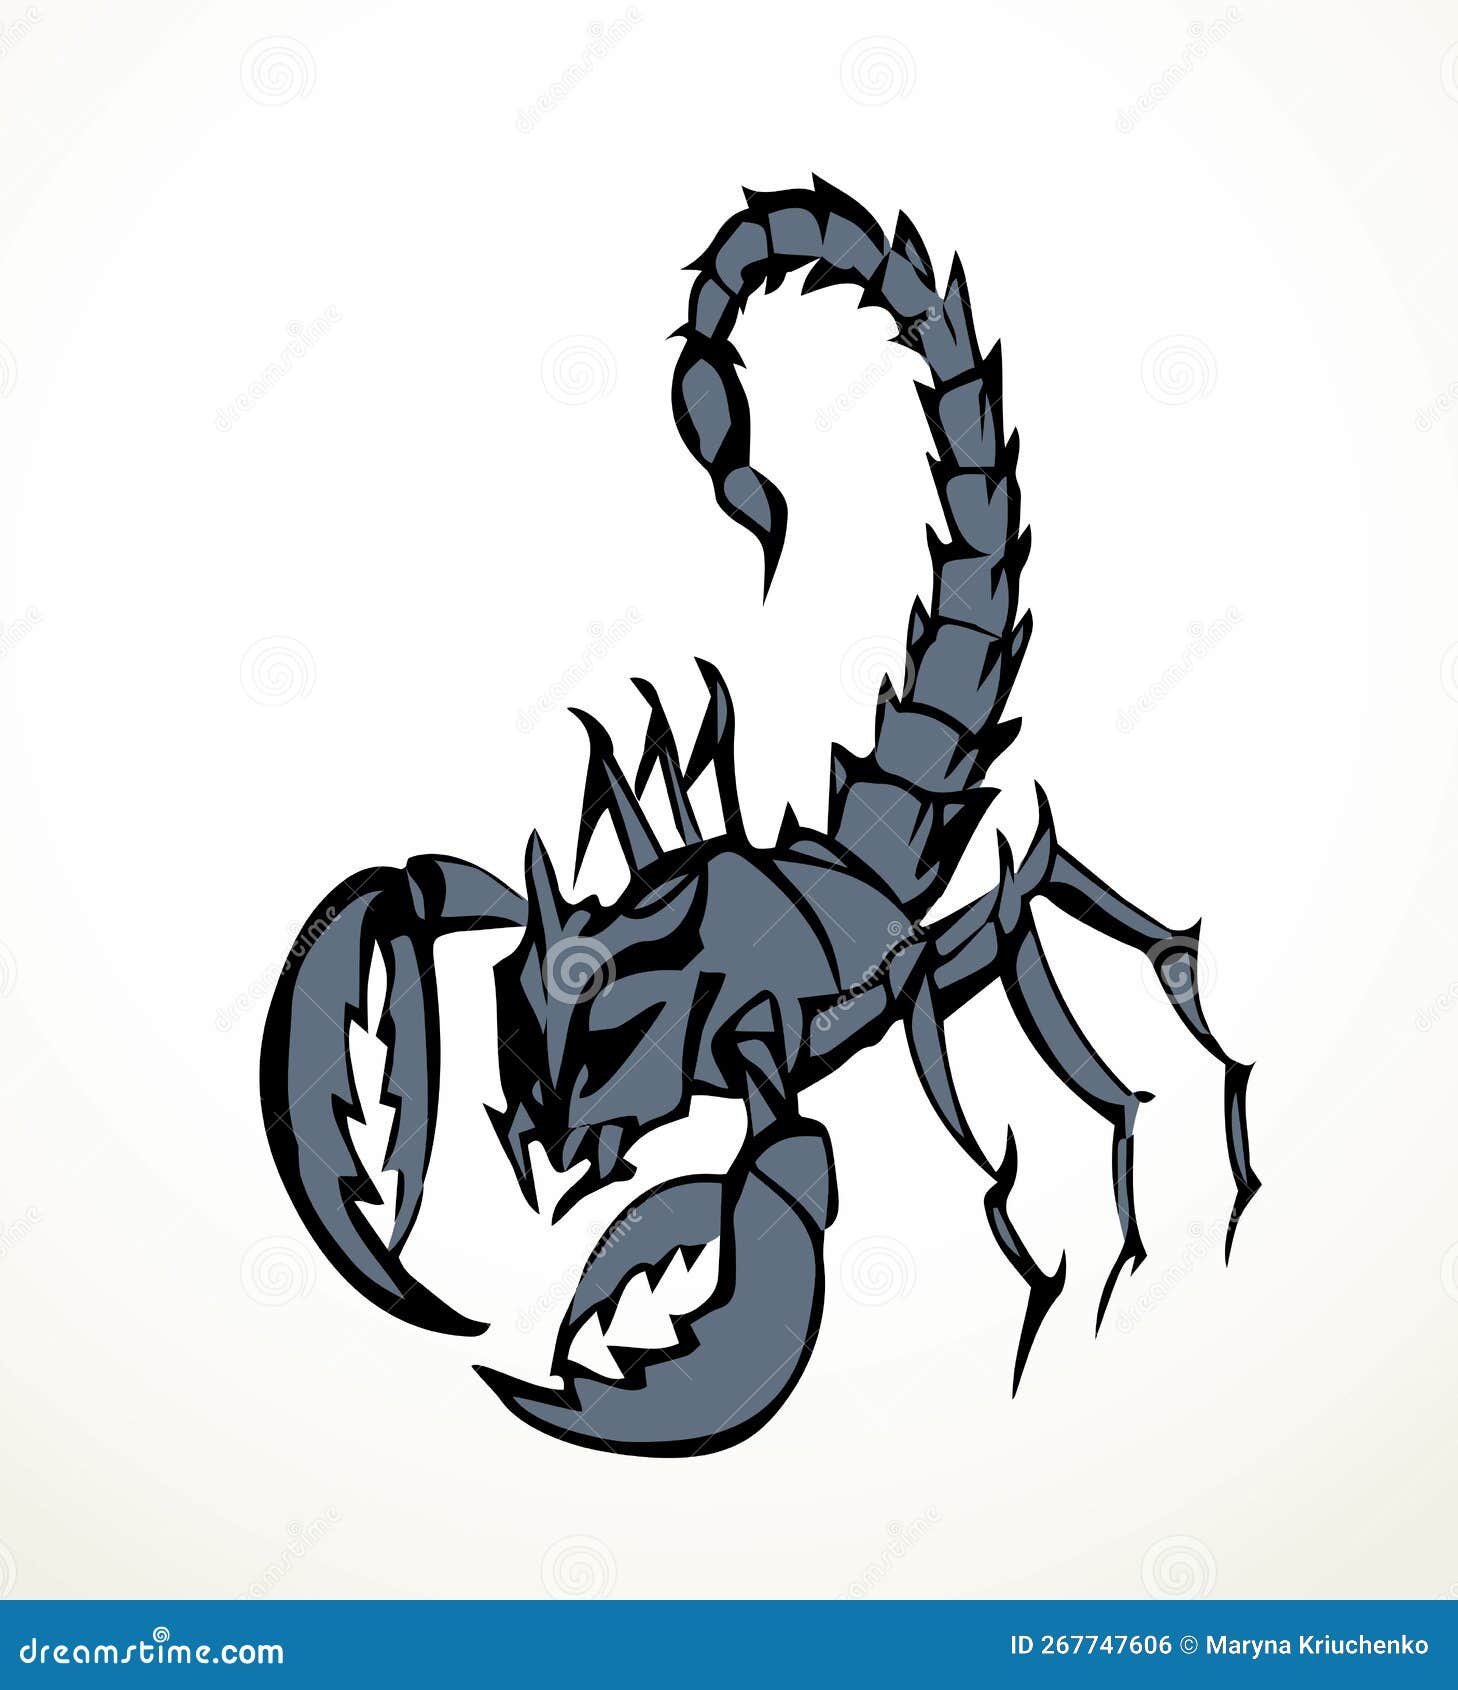 Big Scary Scorpion. Drawing Stock Vector - Illustration of graphic, pictogram: